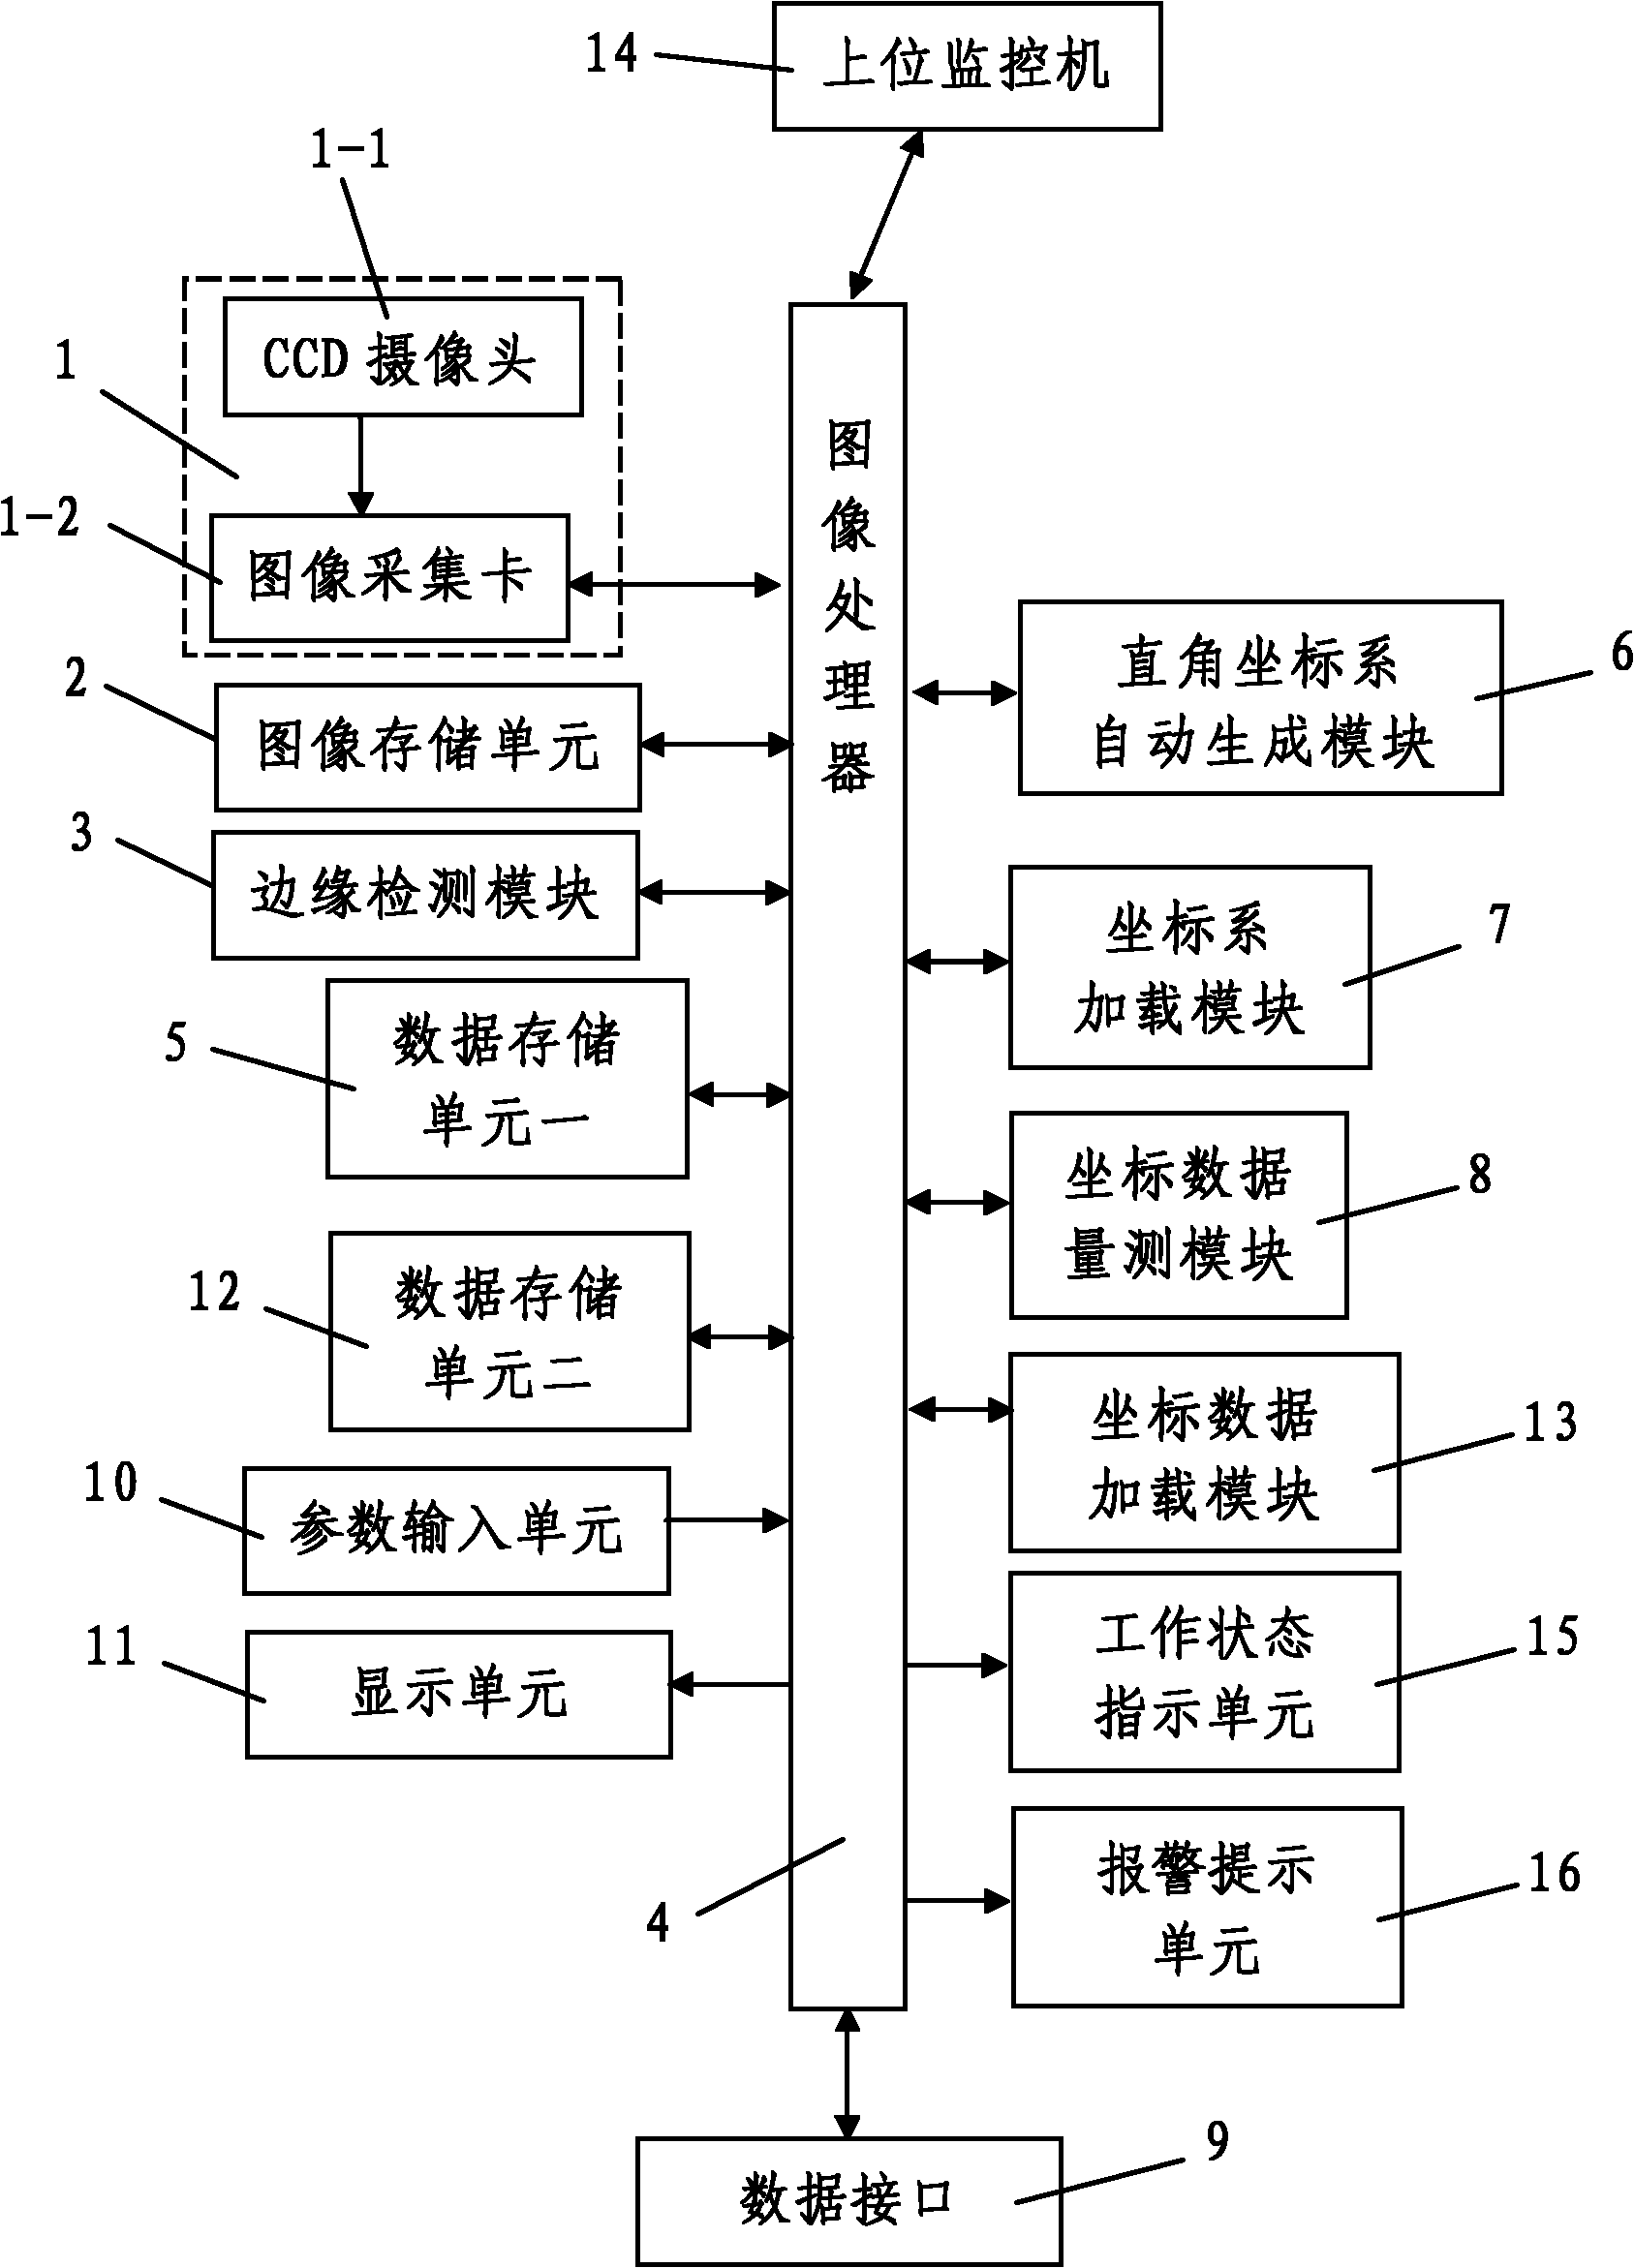 Automatic generation system of numerical control machine tool working diagram